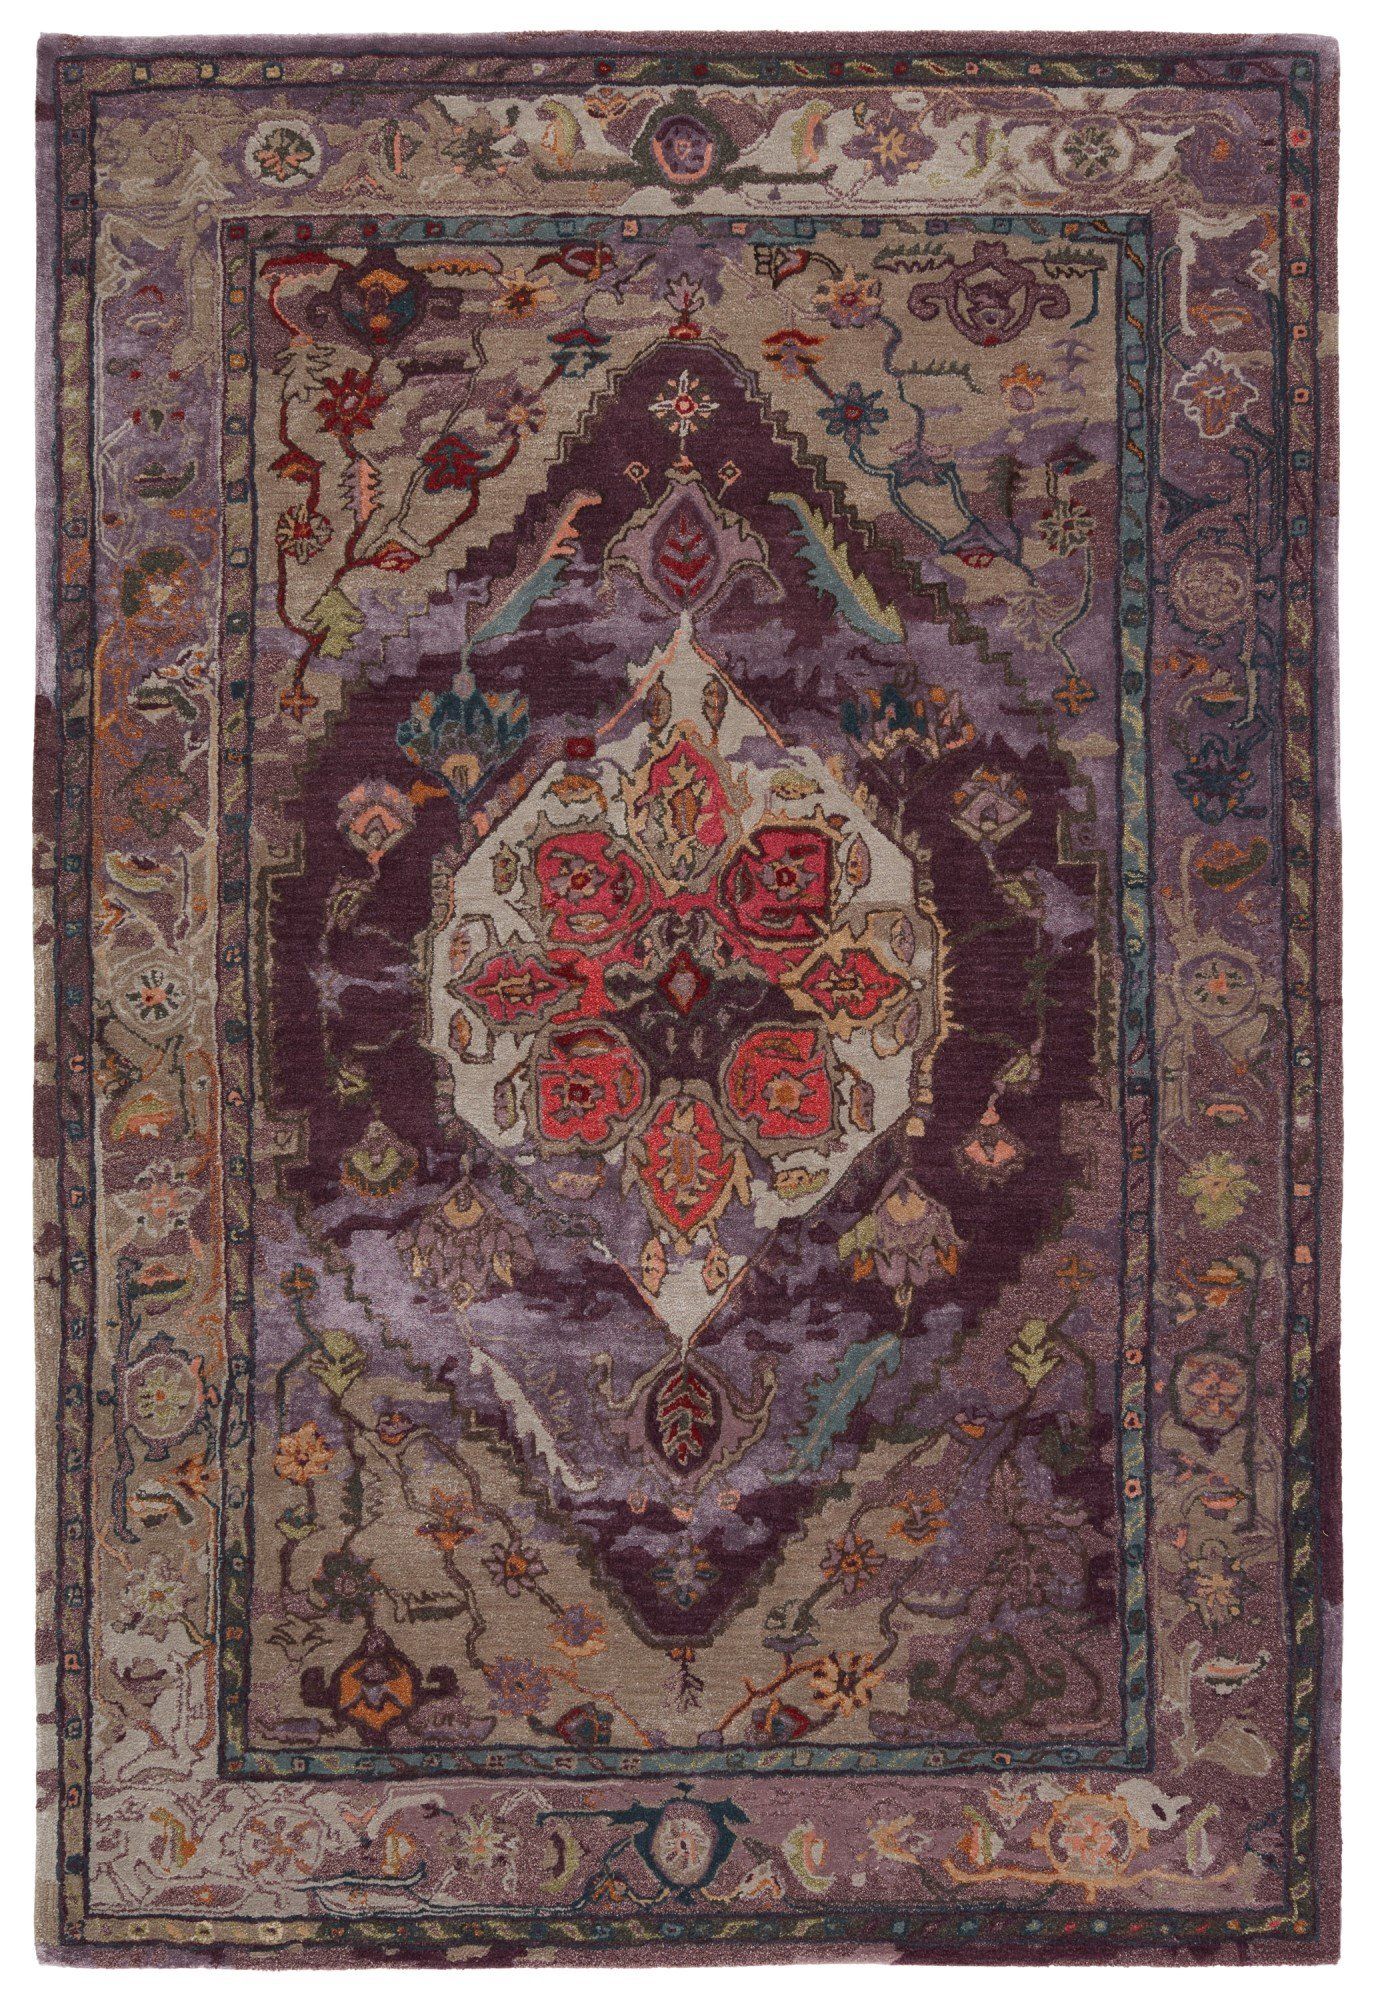 Shop Purple Area Rugs – Free Shipping On All Rugs | Rugs Direct With Purple Rugs (View 5 of 15)